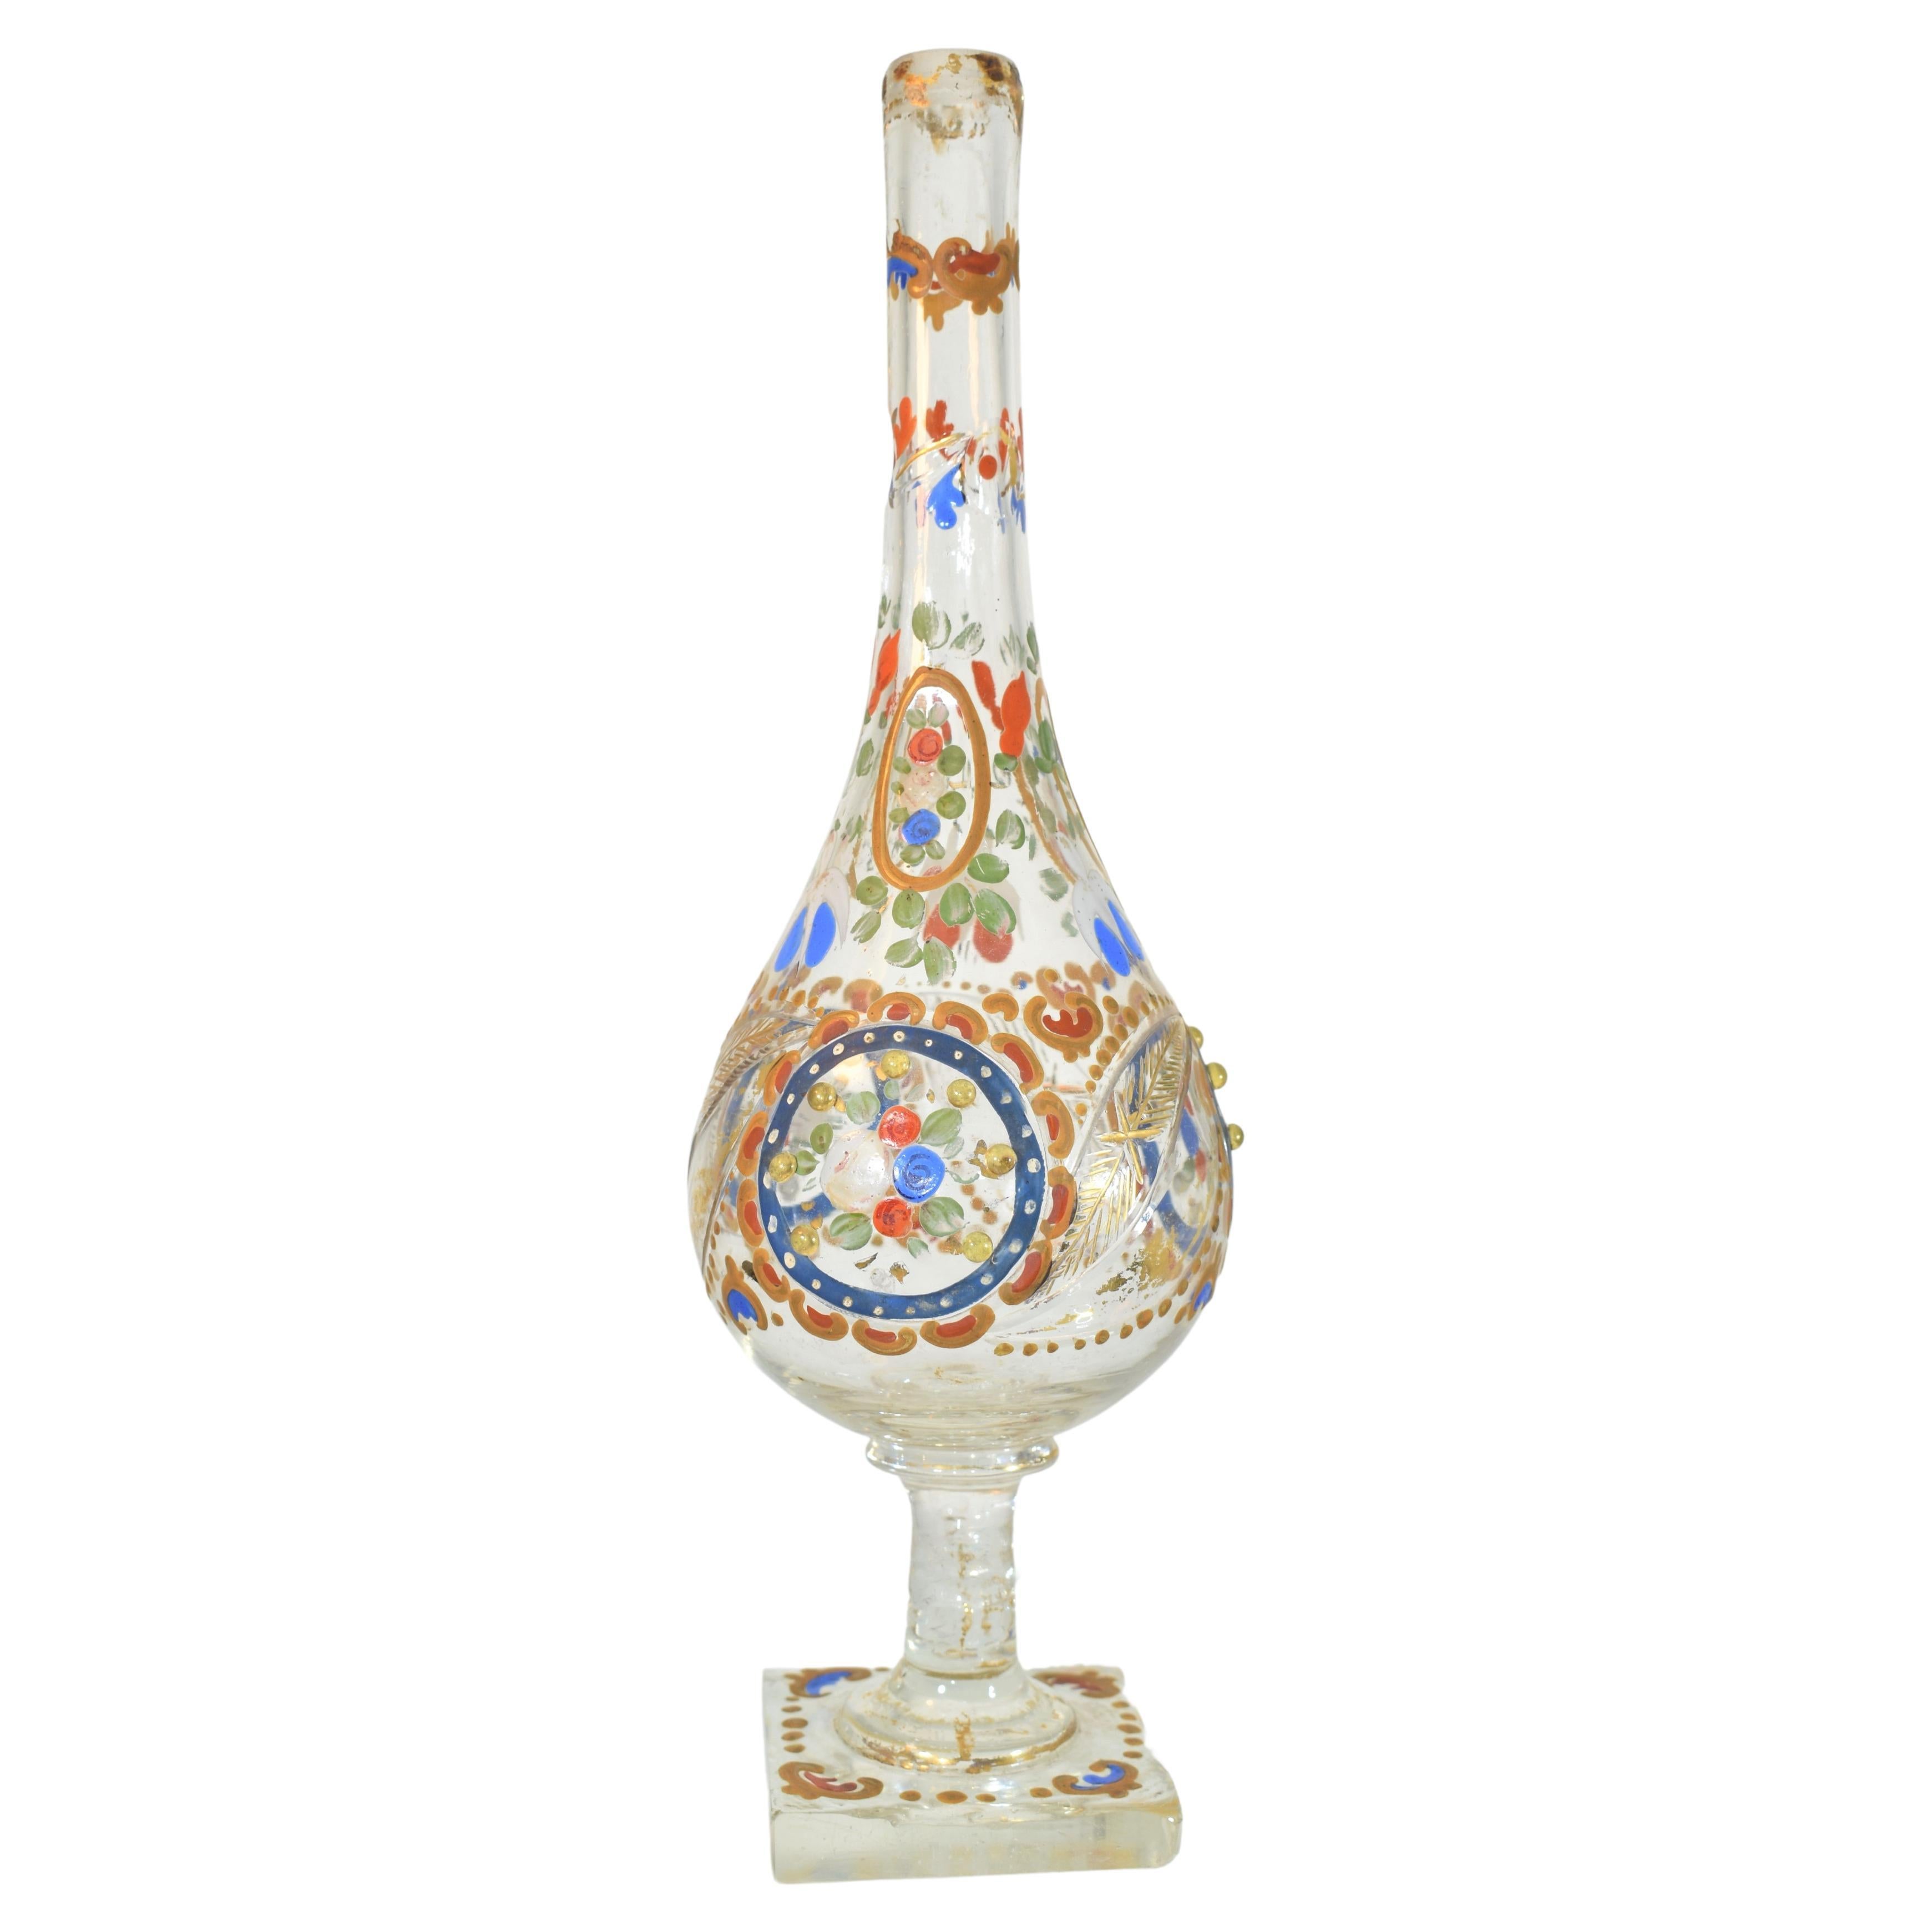 Antique islamic rose water sprinkler
19th Century, cut and decorated with colorful enamel
26 cm high.